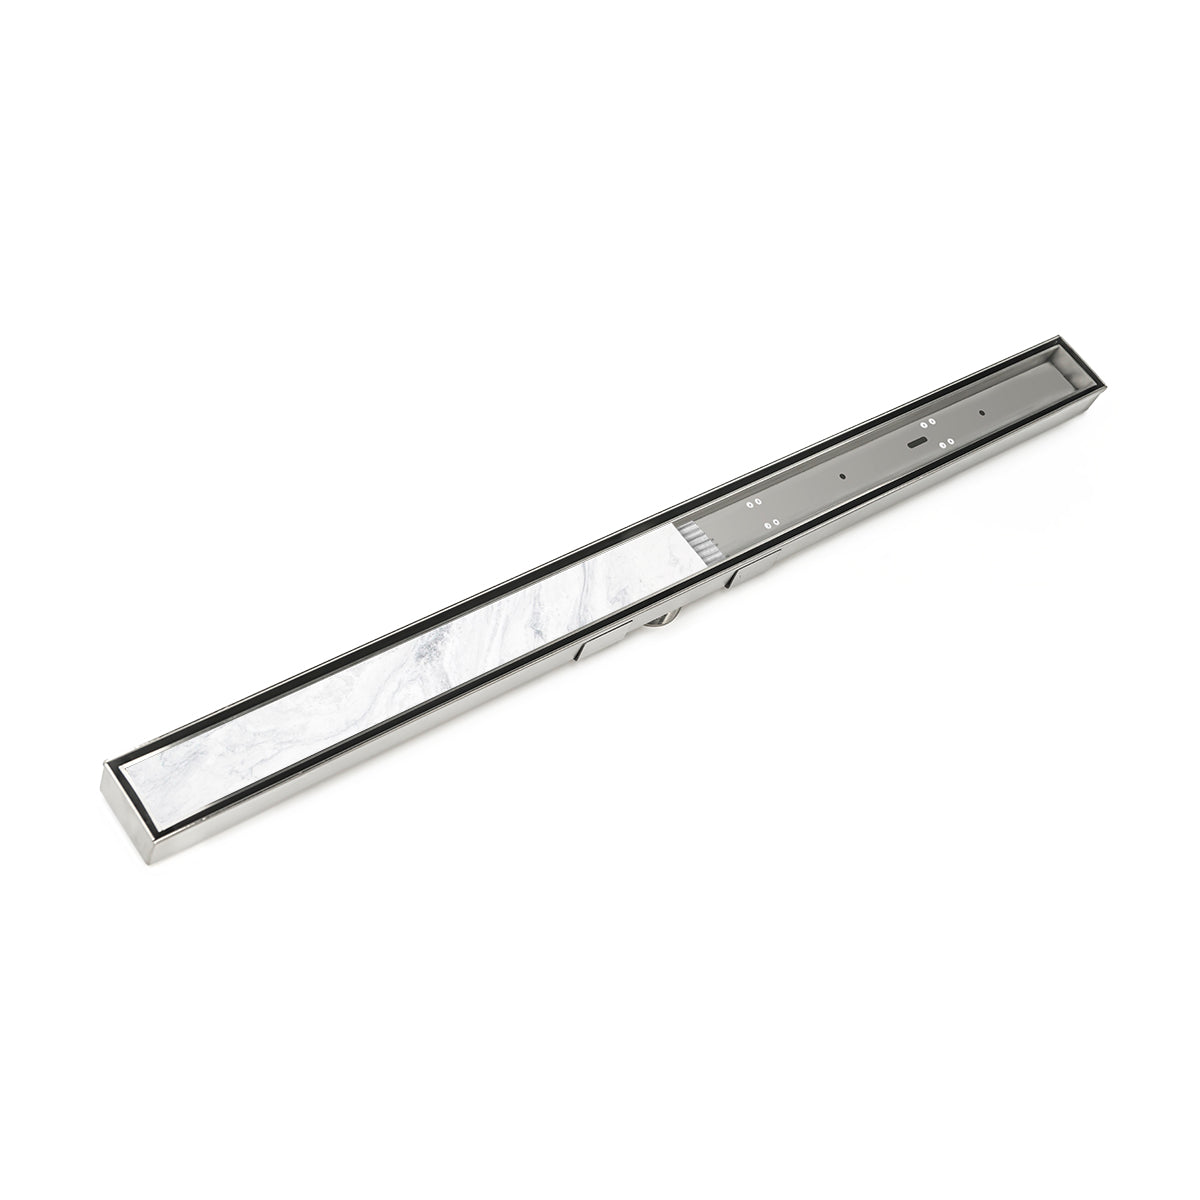 Infinity Drain 72" S-Stainless Steel Series High Flow Site Sizable Linear Drain Kit with Low Profile Tile Insert Frame with Cast Iron Drain Body, 3" No Hub Outlet